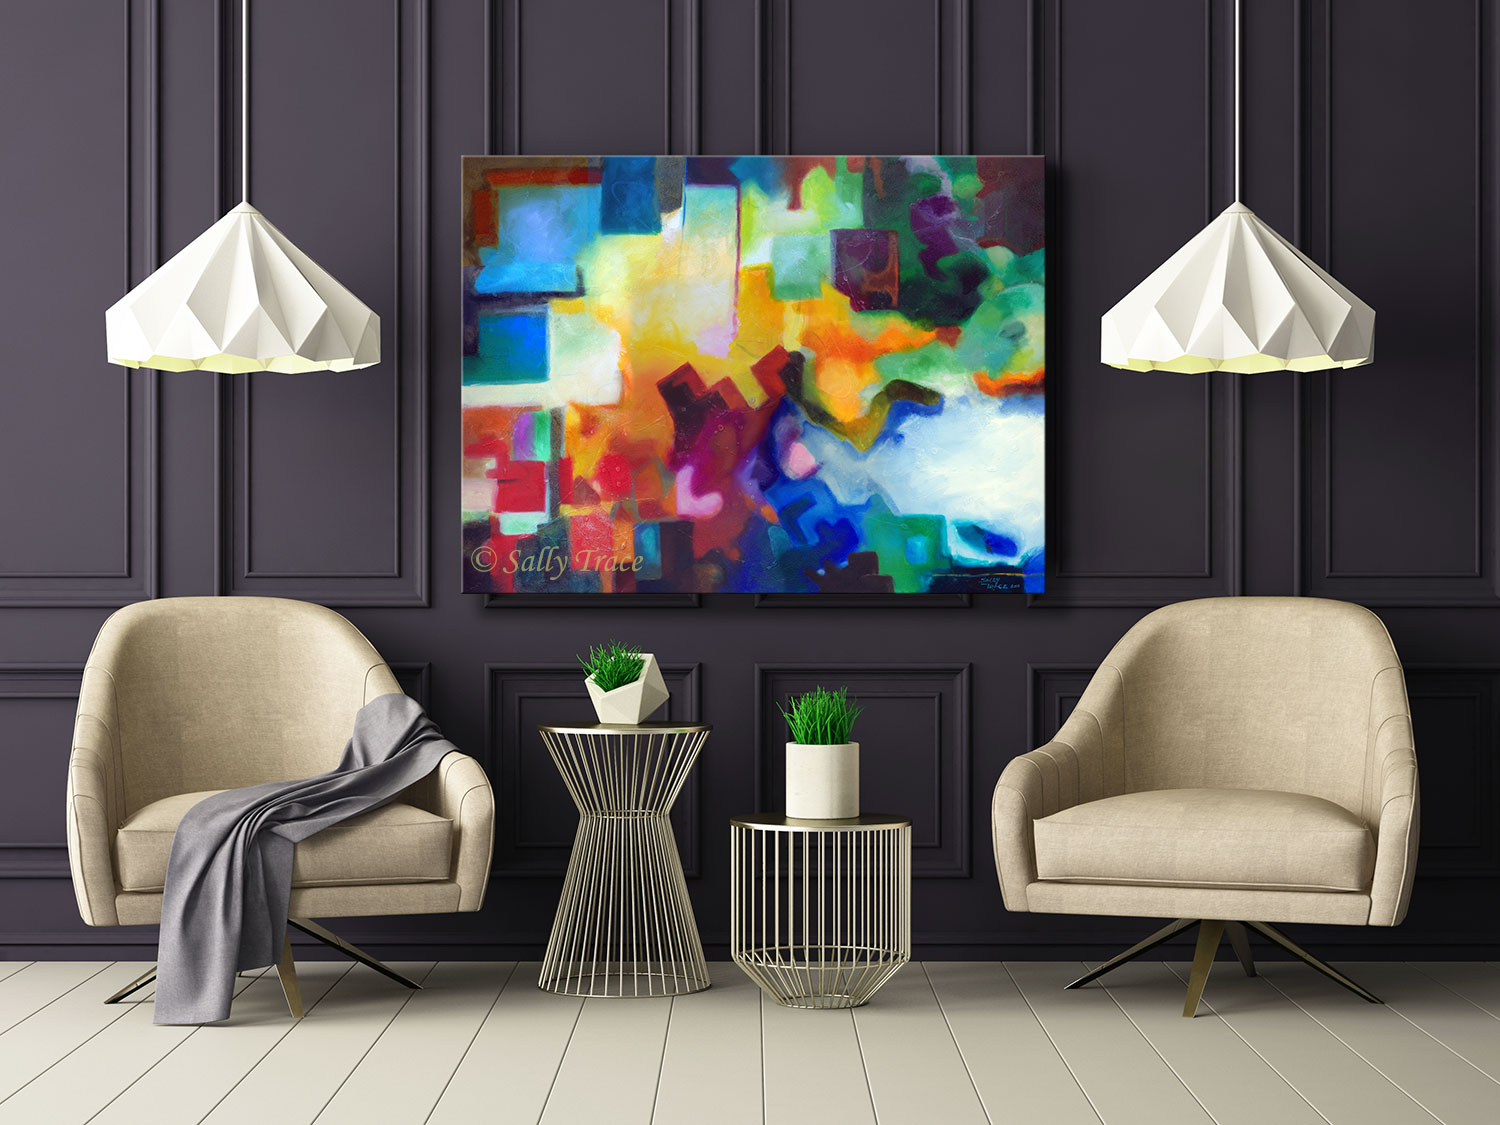 Abstract geometric painting giclee print on canvas by Sally Trace "To See Beyond", room view